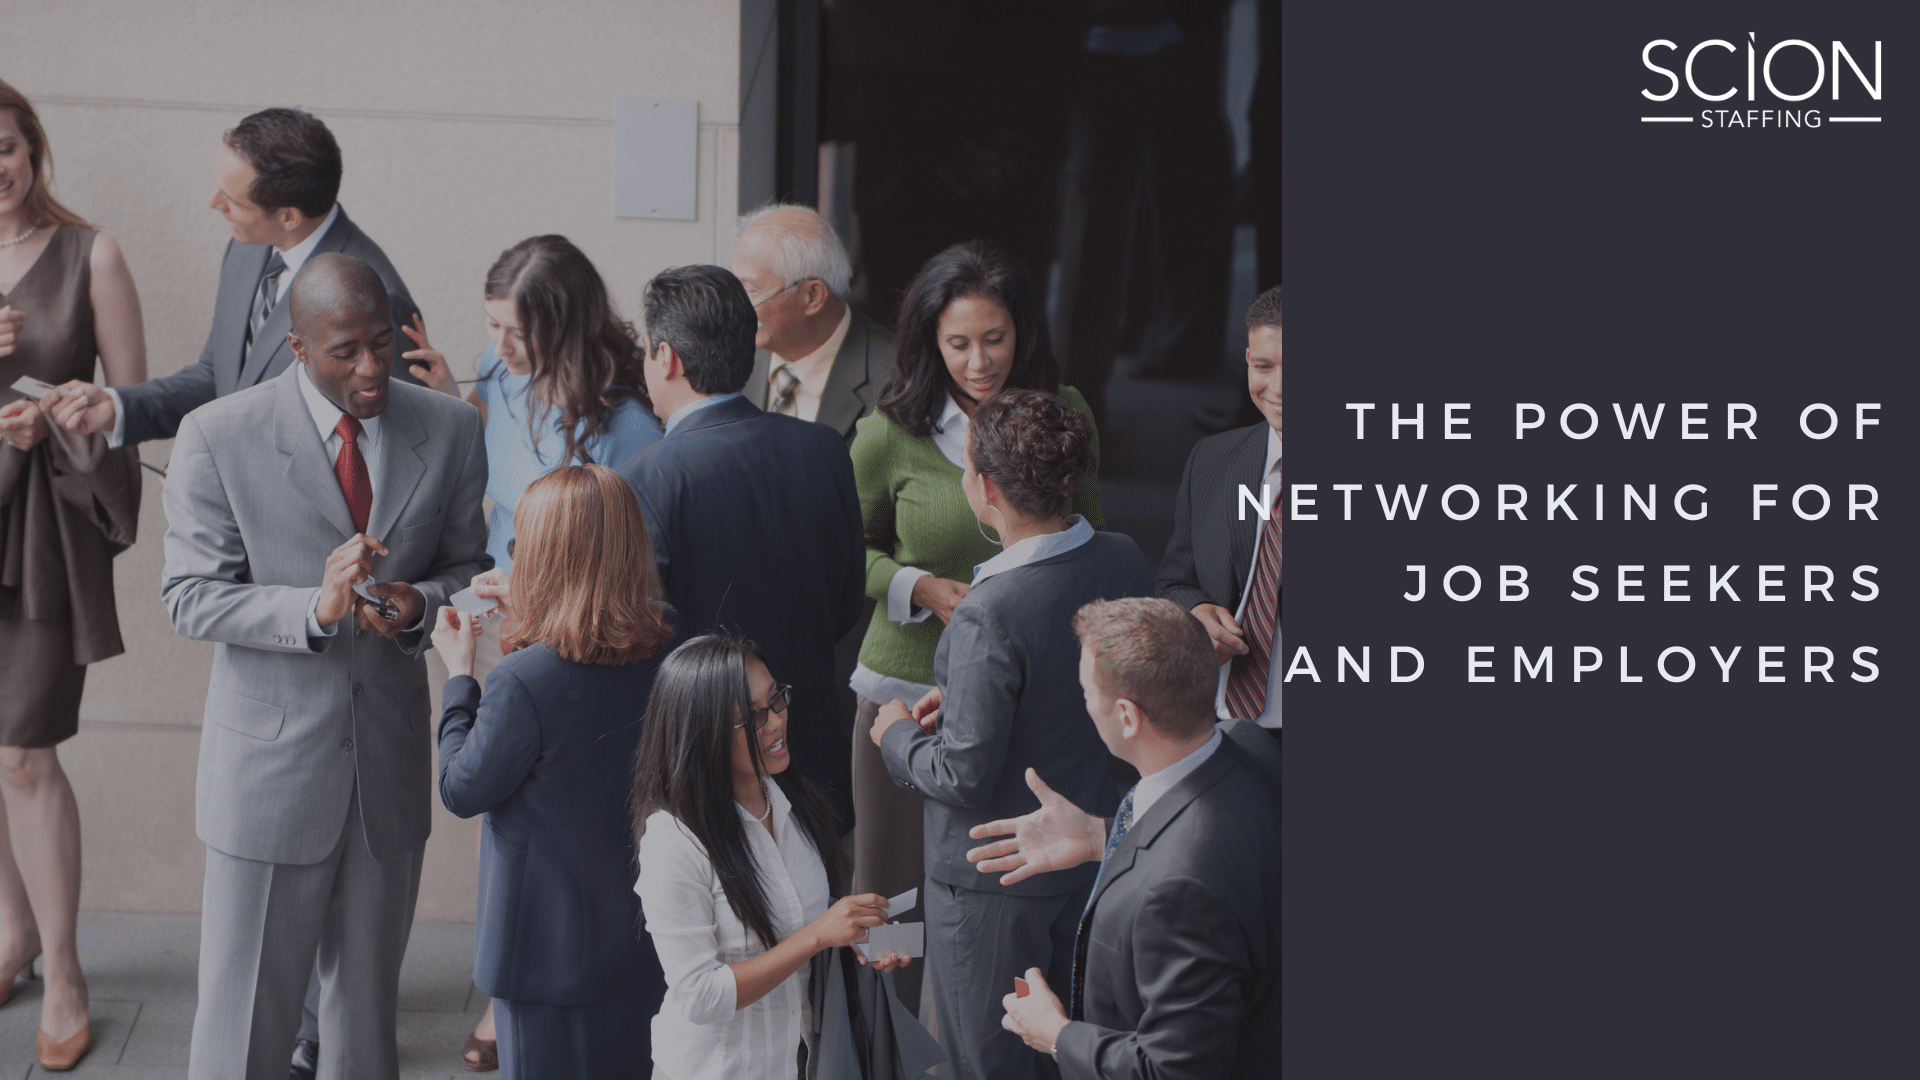 The Power of Networking for Job Seekers and Employers